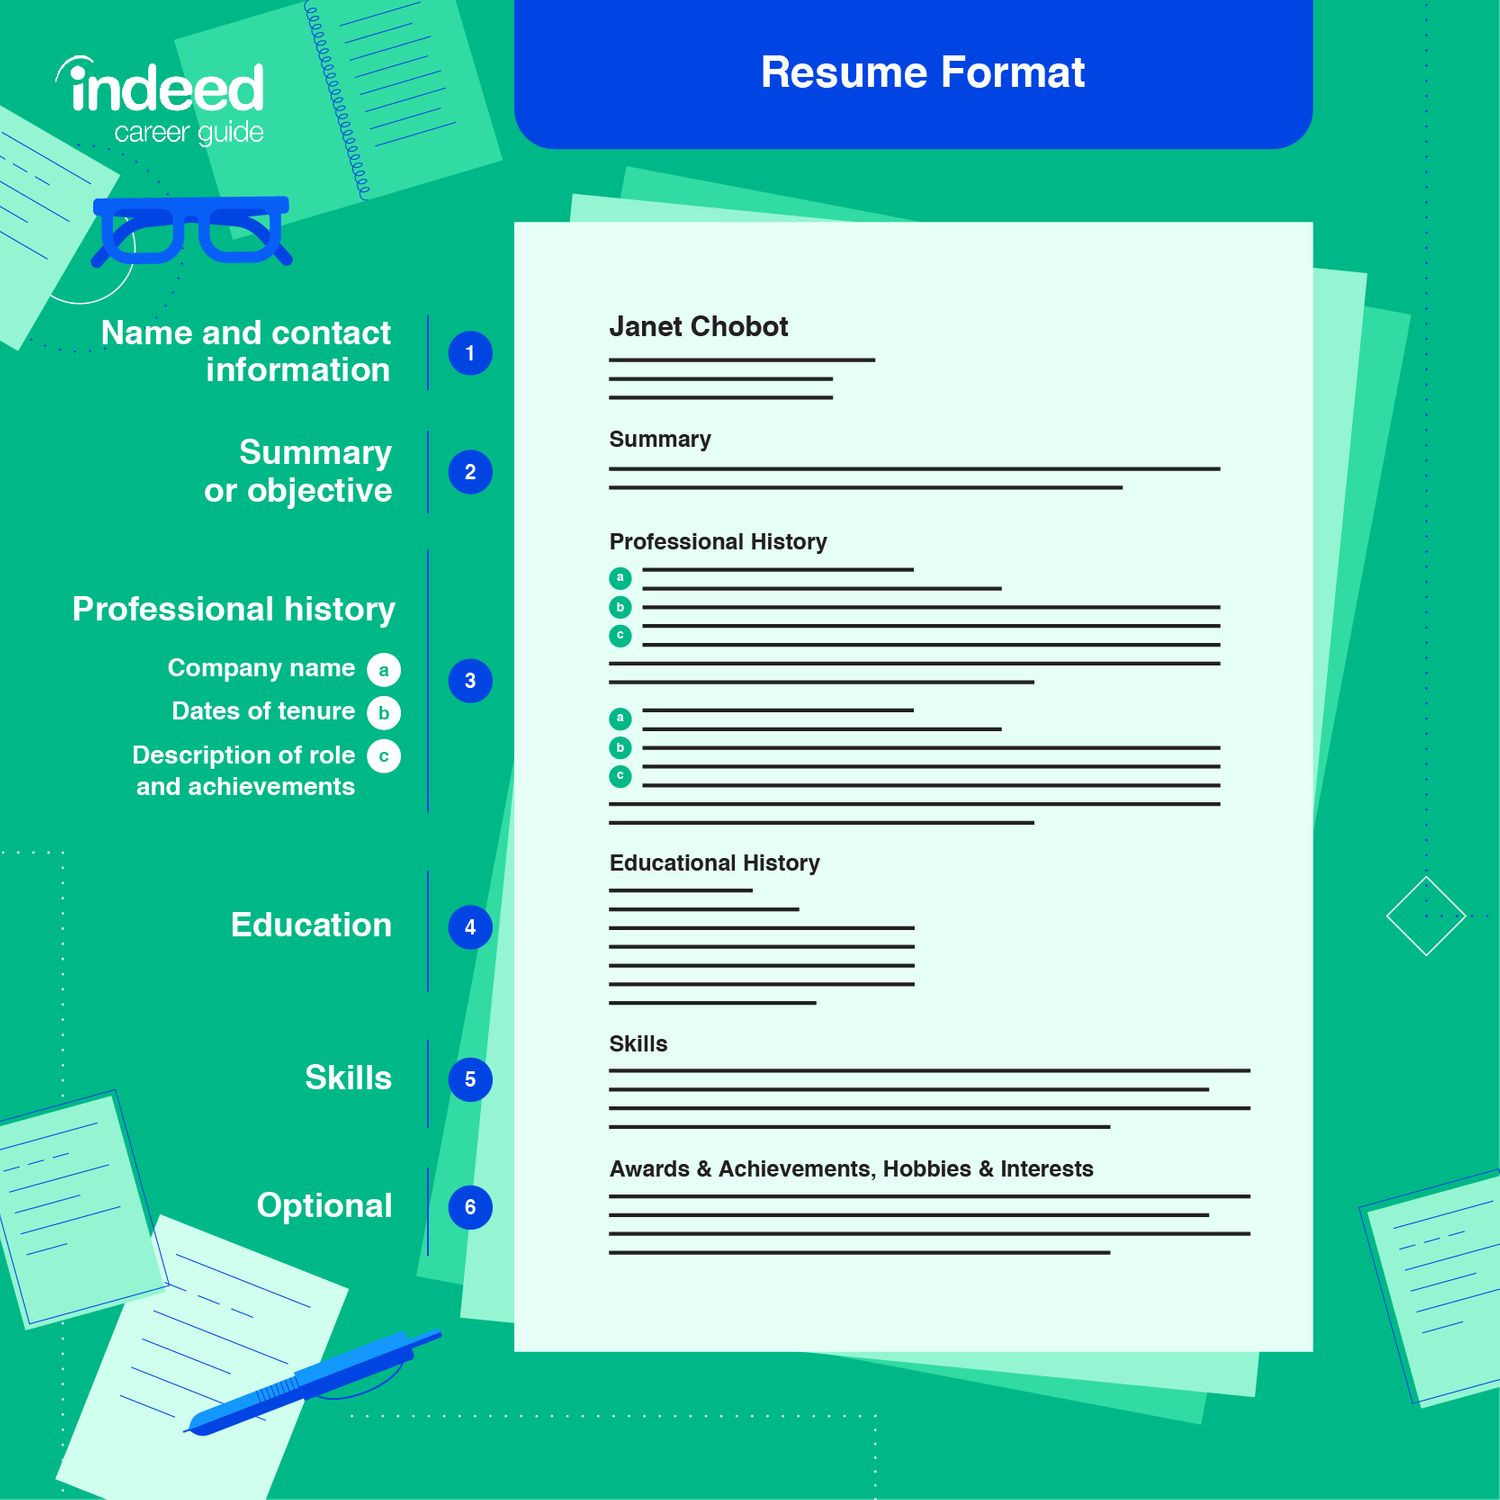 Area Of Interest In Resume Sample Listing Hobbies and Interests On Your Resume (with Examples …